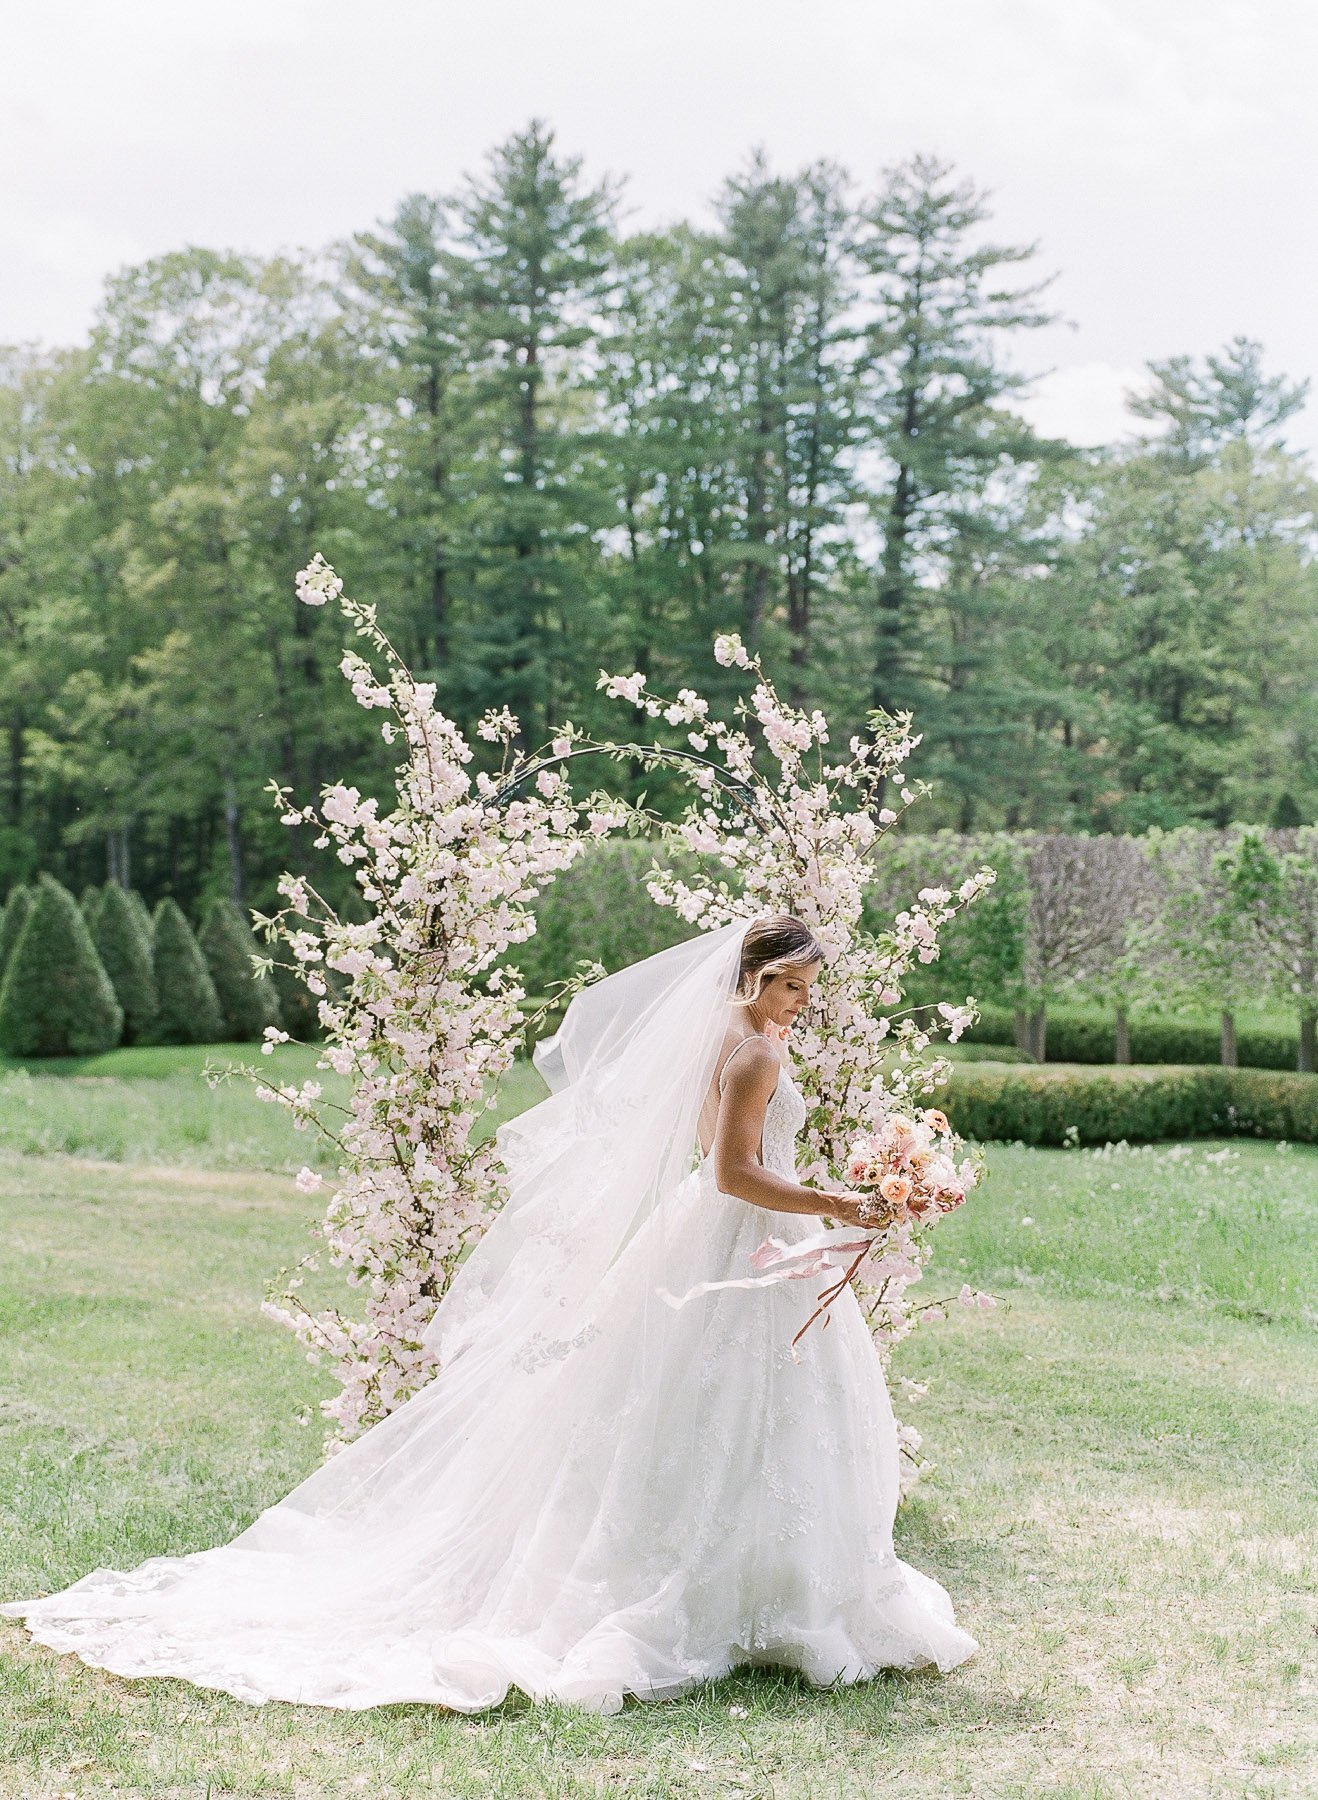 Kelly Strong The Mount Styled Wedding Editorial in Lenox MA by Michelle Lange Photography-74.jpg